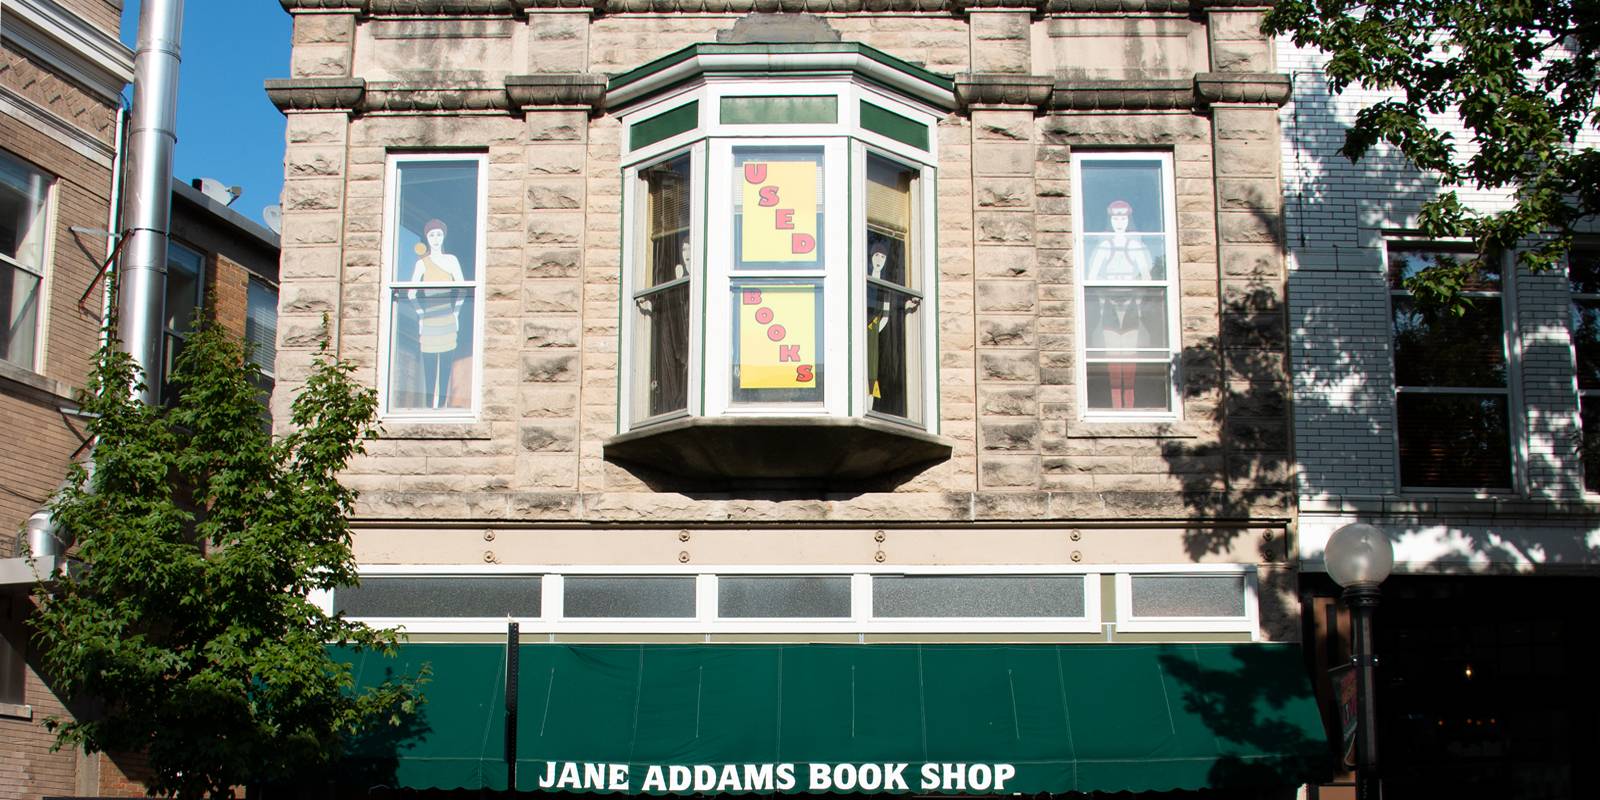 Jane Addams Bookshop is all about experience and variety